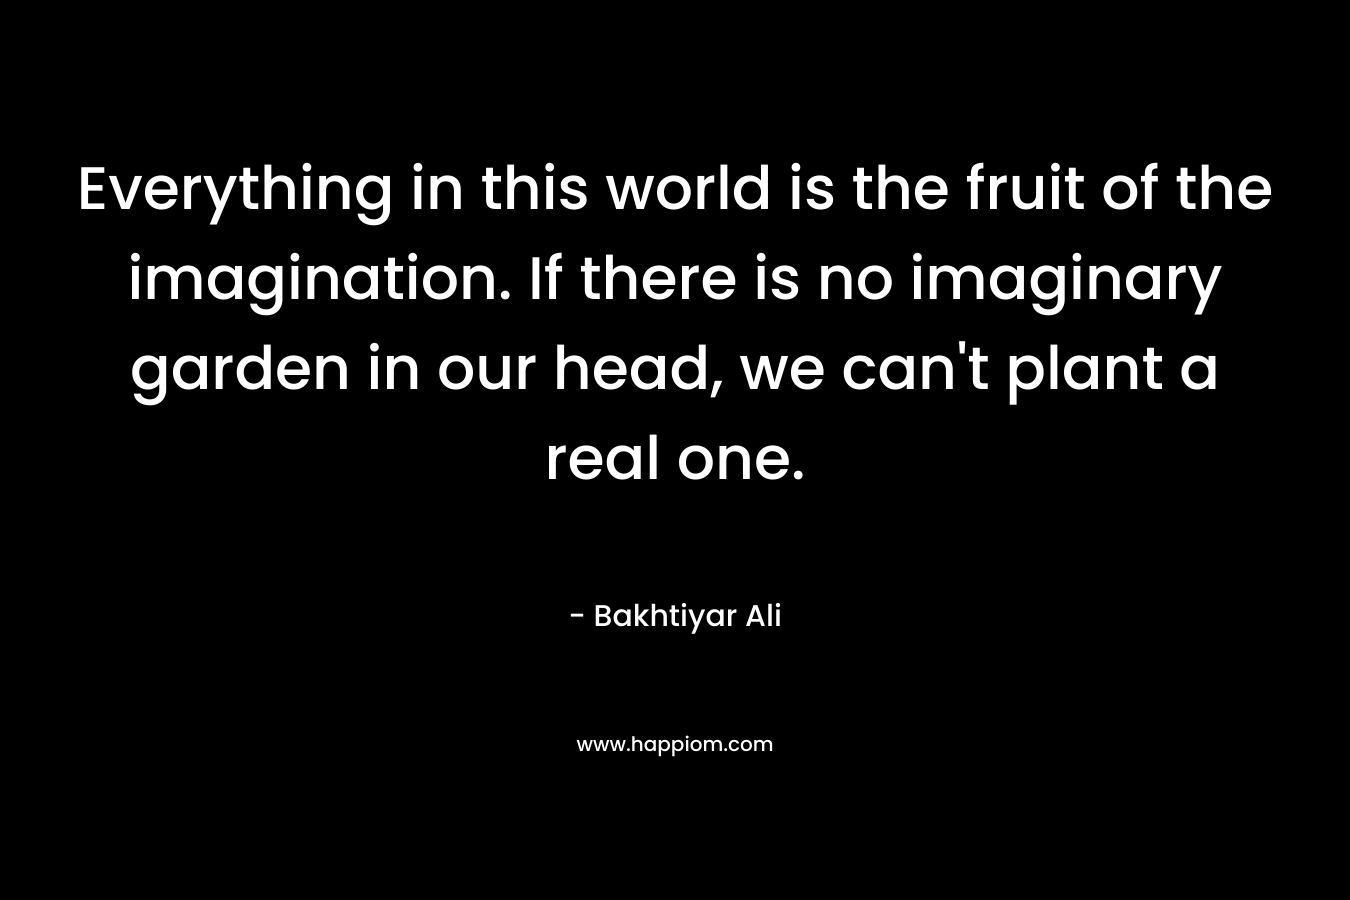 Everything in this world is the fruit of the imagination. If there is no imaginary garden in our head, we can't plant a real one.